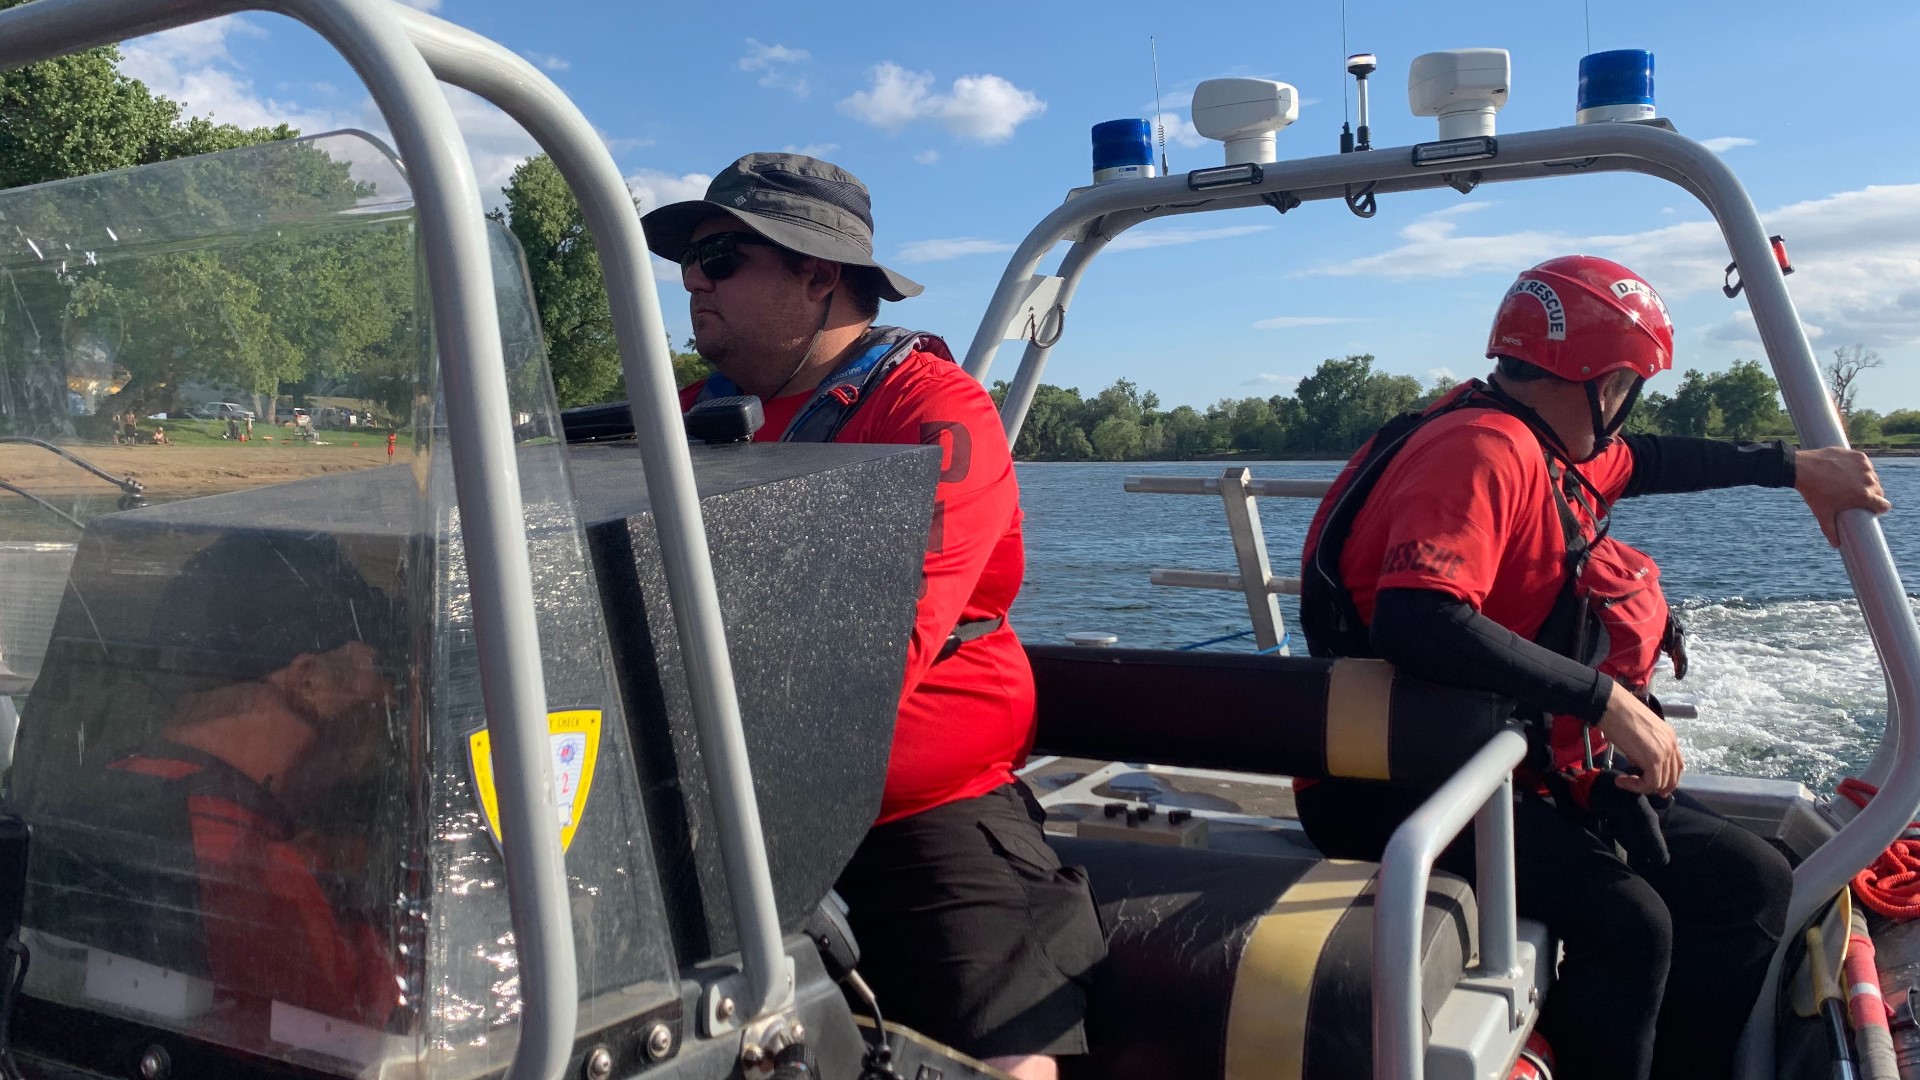 The start of the busy season for volunteers with Sacramento's Drowning Accident Rescue Team has begun, and they expect to be out every weekend until Labor Day helping people stay safe.